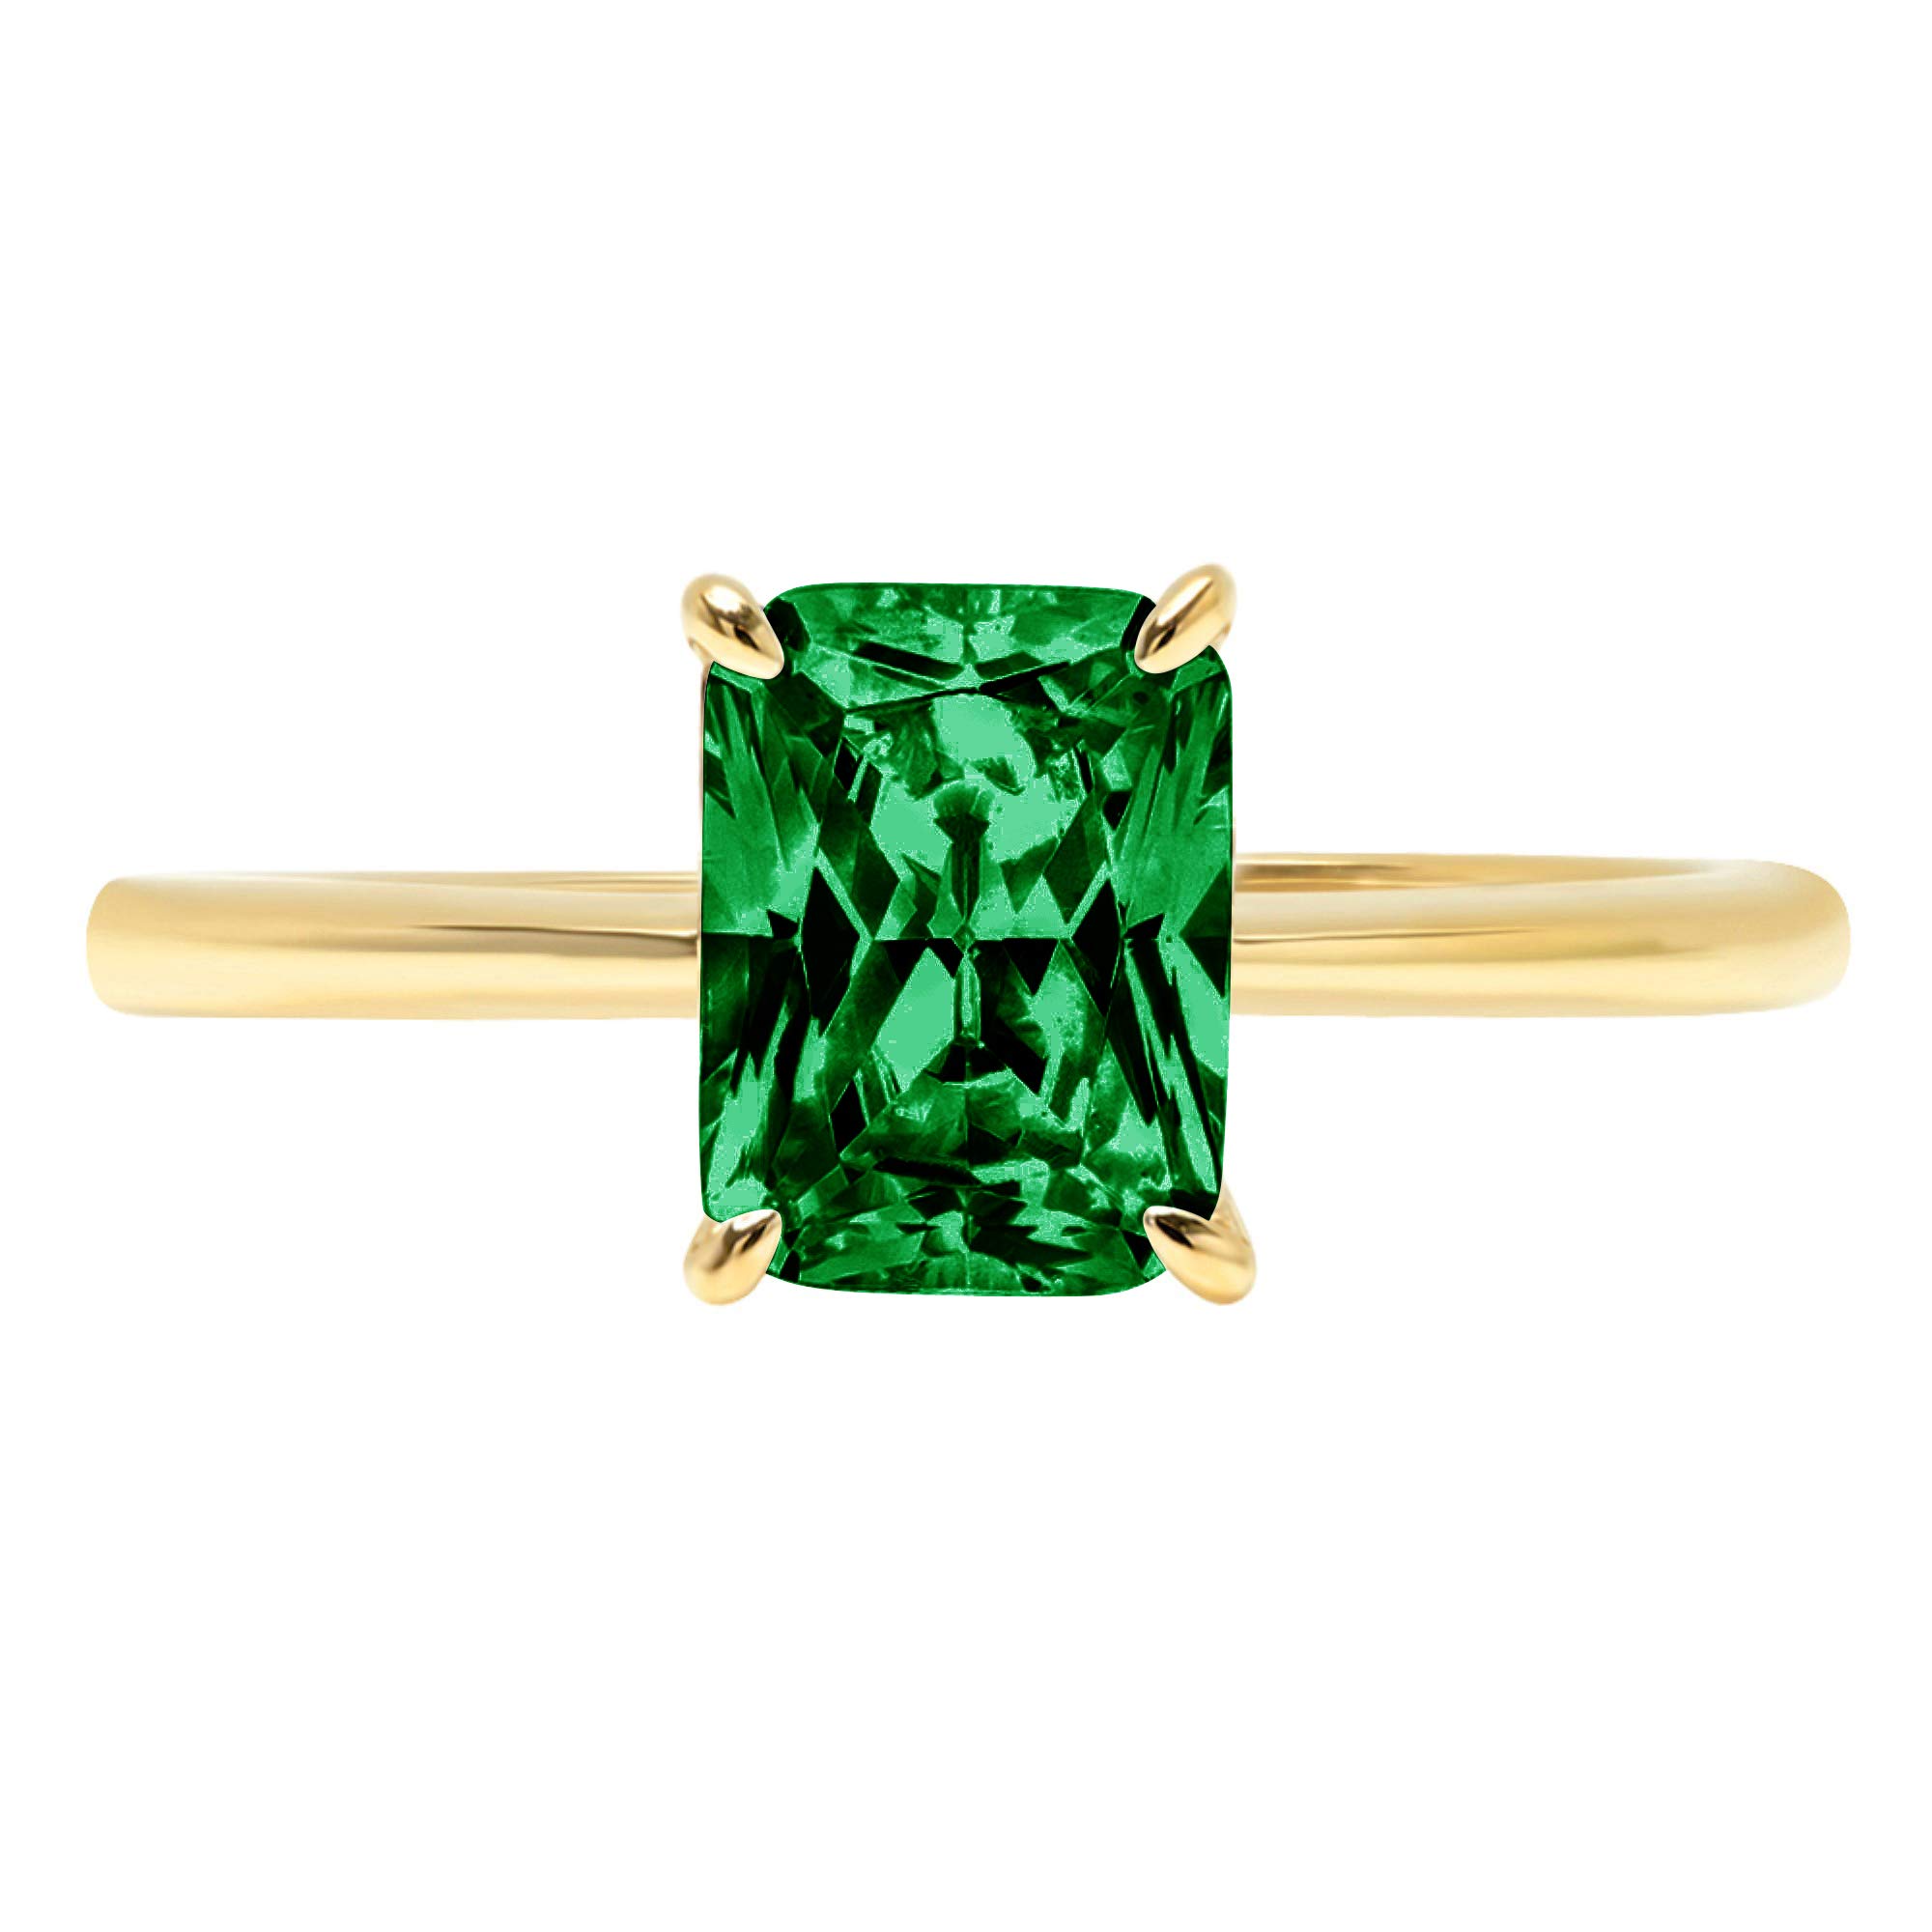 2.4ct Brilliant Radiant Cut Solitaire Flawless Simulated Cubic Zirconia Green Emerald Ideal VVS1 4-Prong Engagement Wedding Bridal Promise Anniversary Designer Ring Solid 14k Yellow Gold for Women